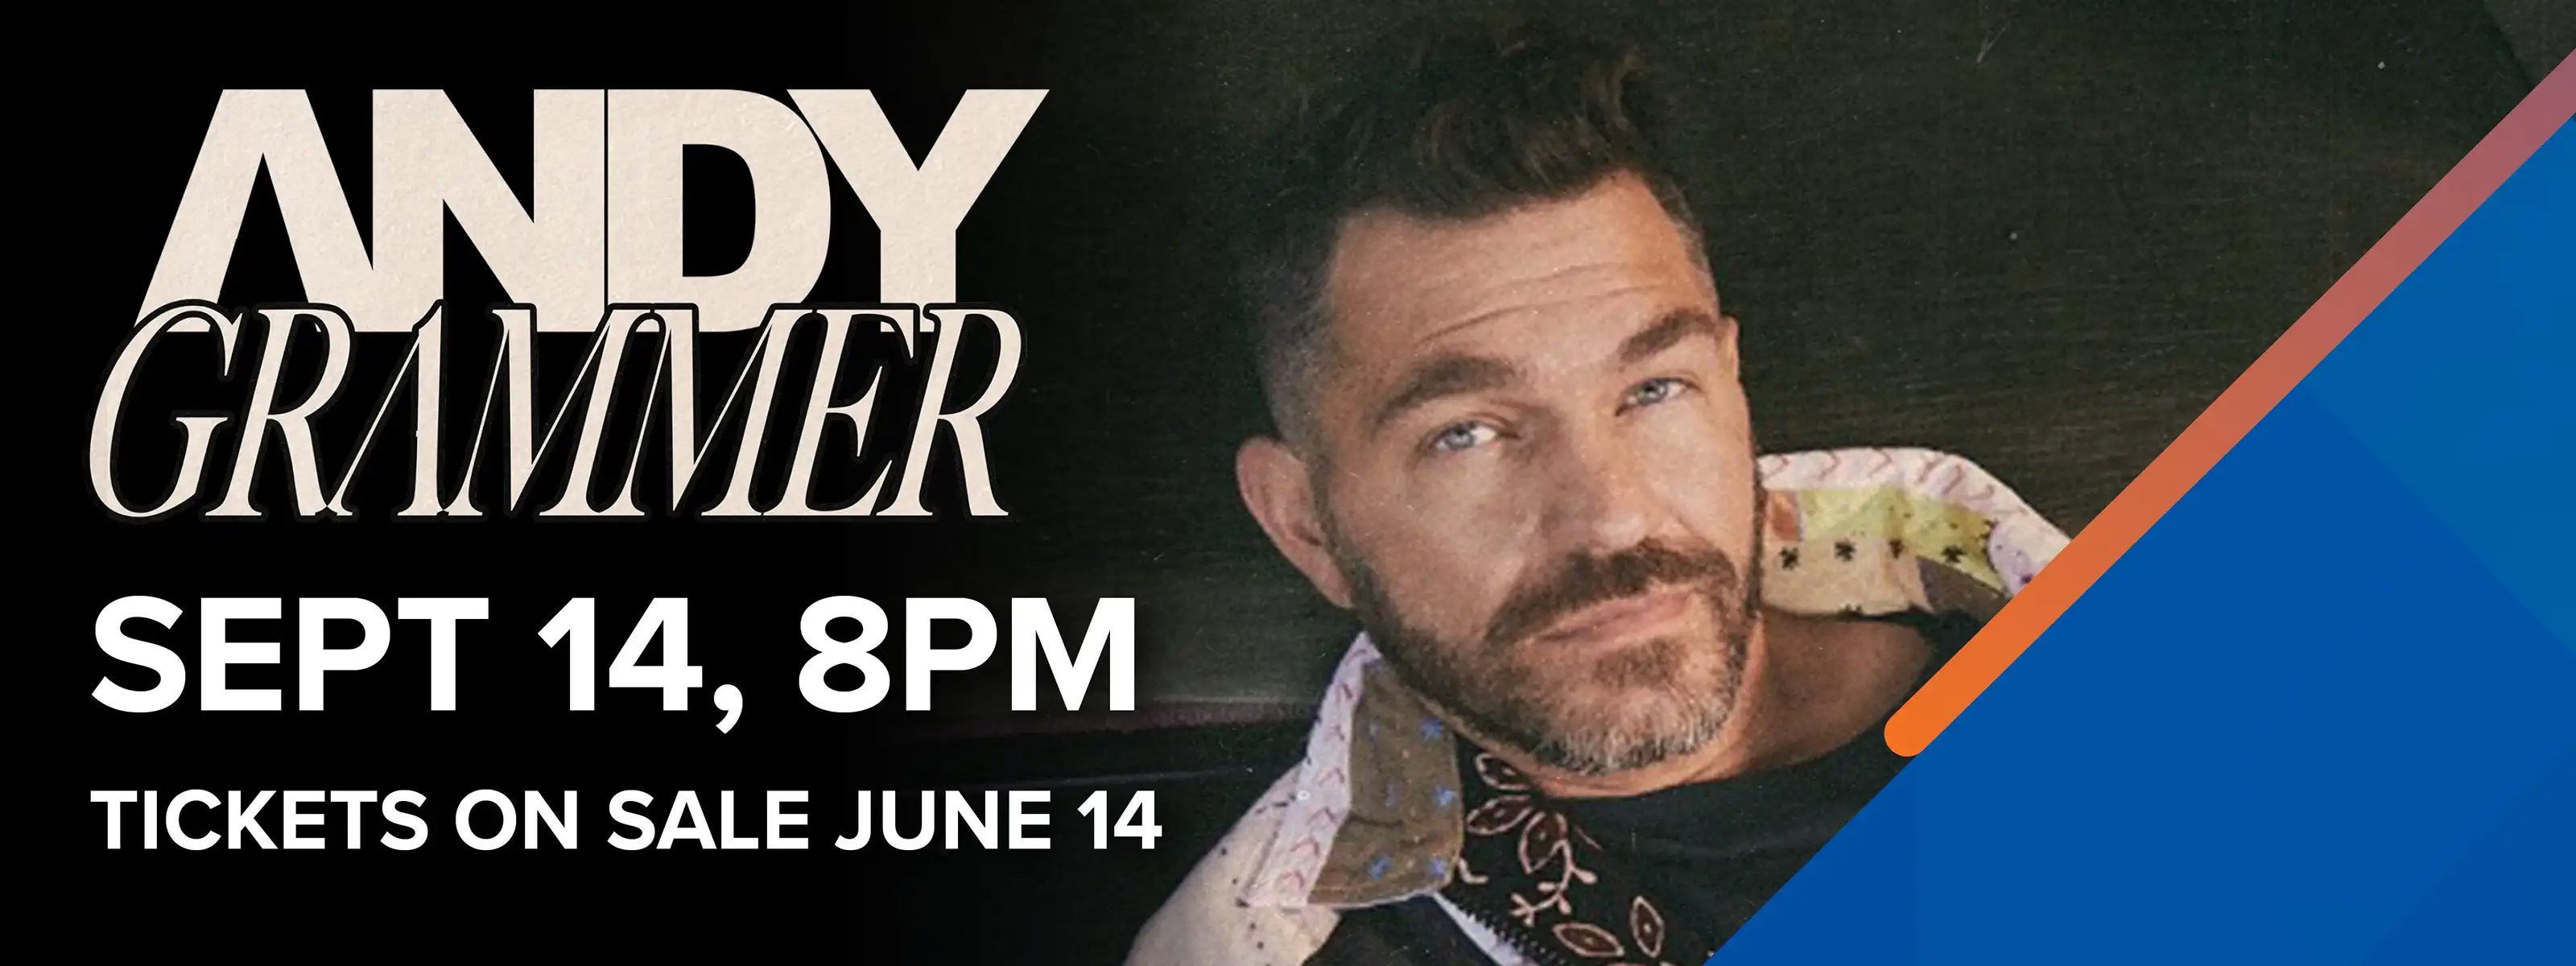 Andy Grammer - Greater Than: A One Man Show - September 14, 8:00pm Tickets On Sale June 14 @ 10am